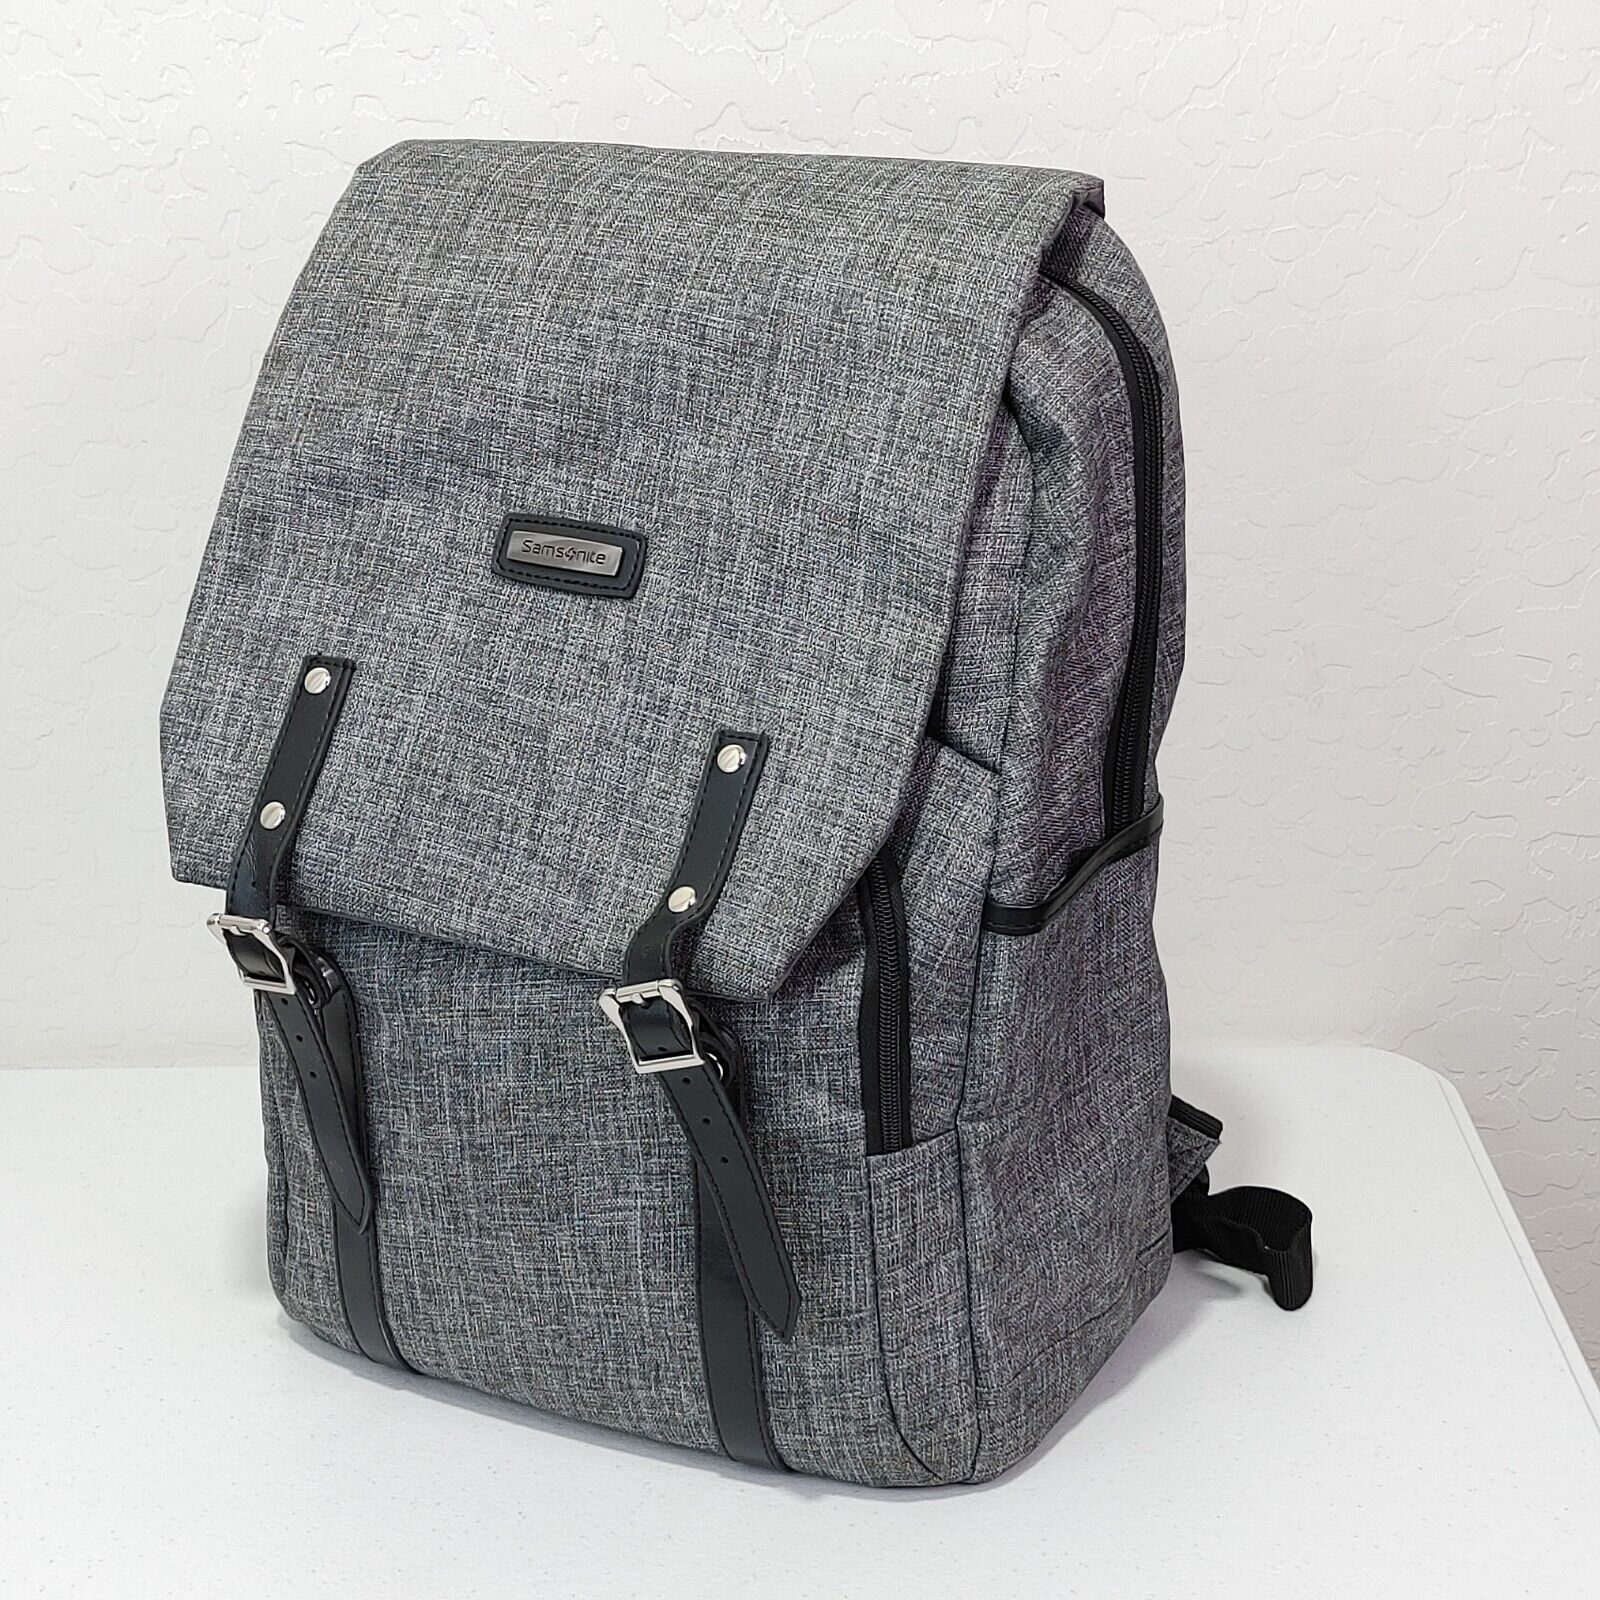 Samsonite Faneuil Jefferson Modern Laptop Large Grey Backpack Good / Clean Cond